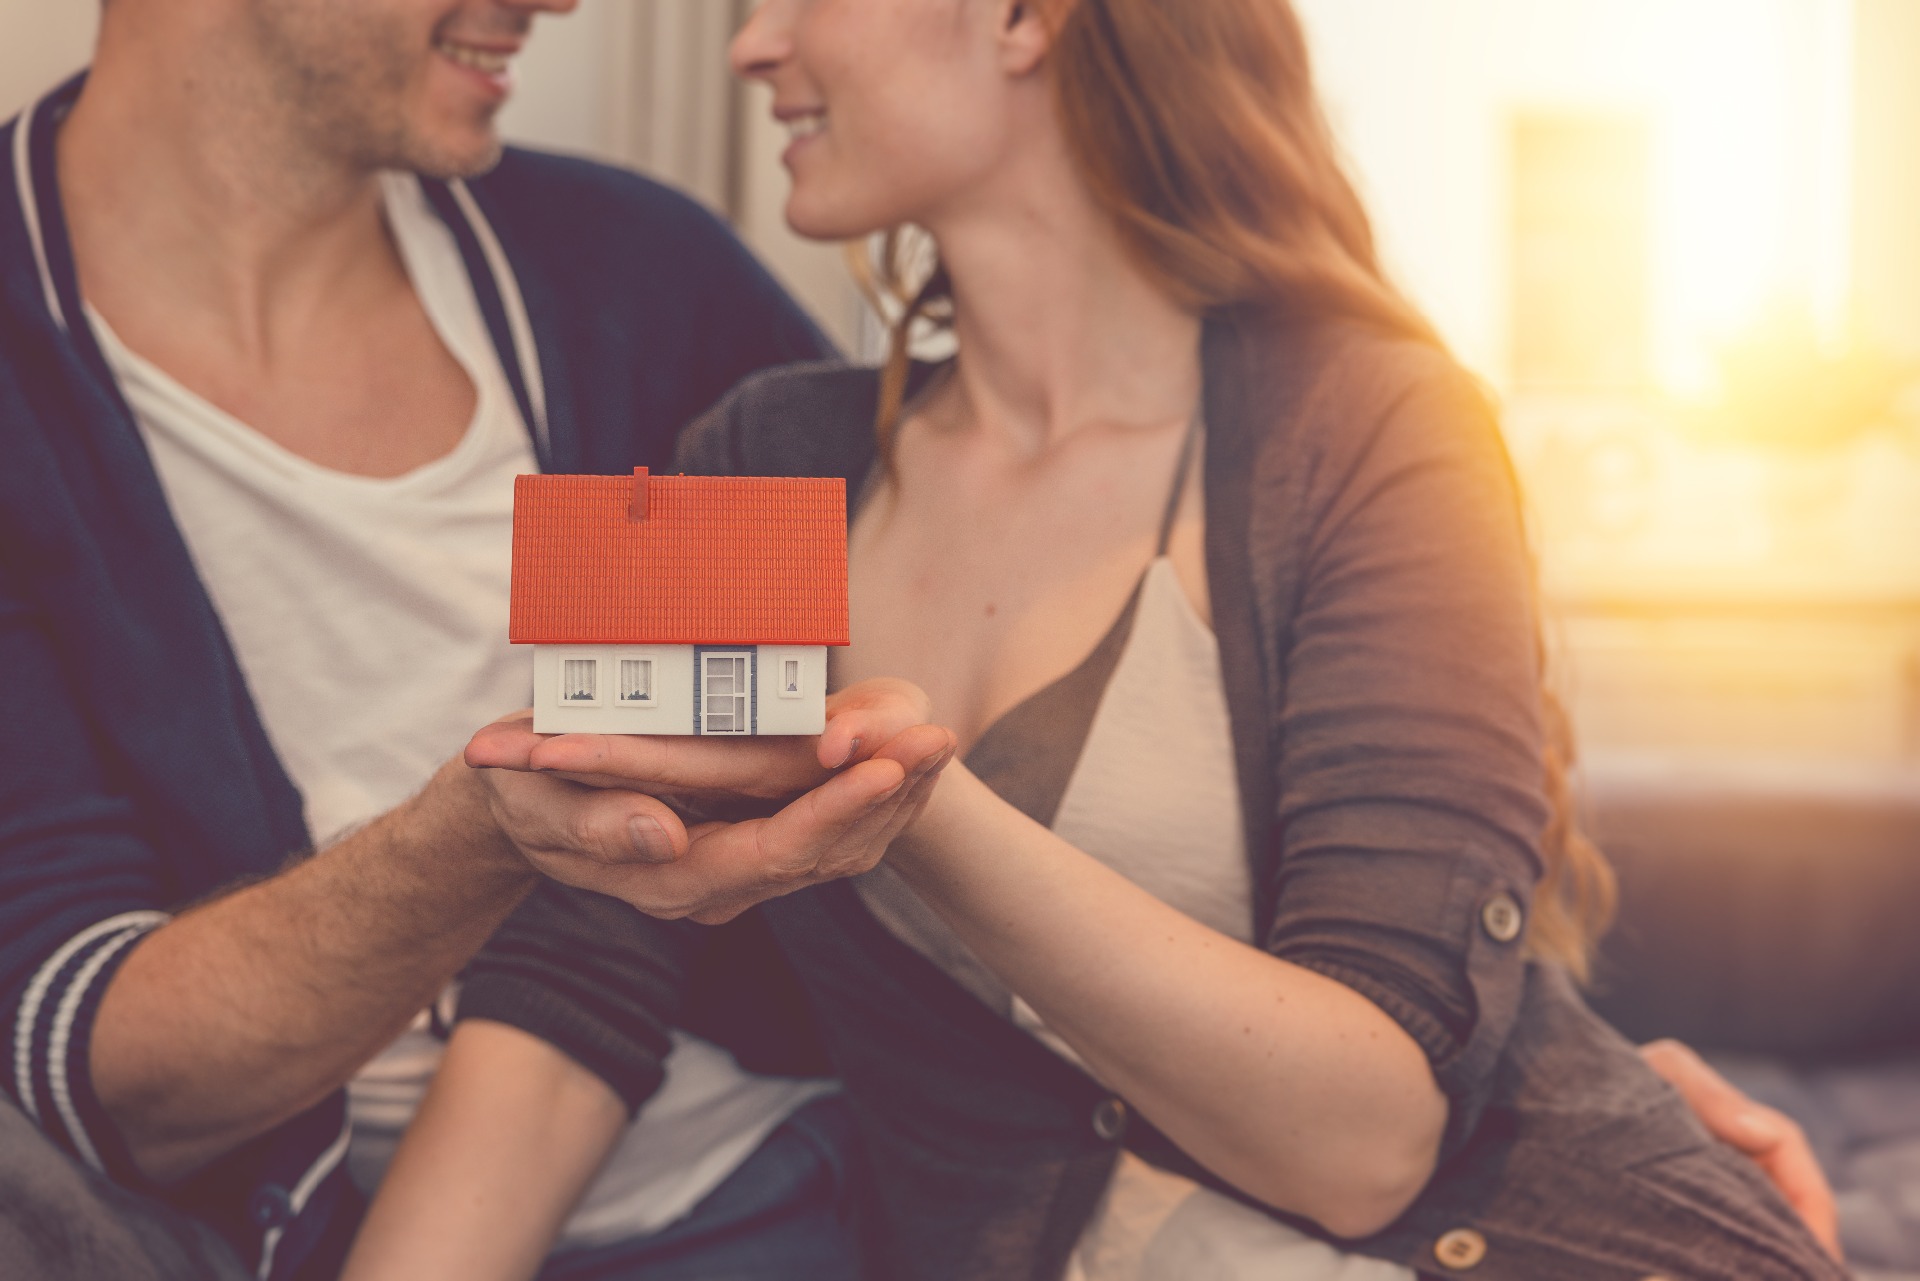 Two people holding a model property in their hands, smiling at each other; our Conveyancing Solicitors in Lytham discuss different types of property ownership and how our team can assist with this.